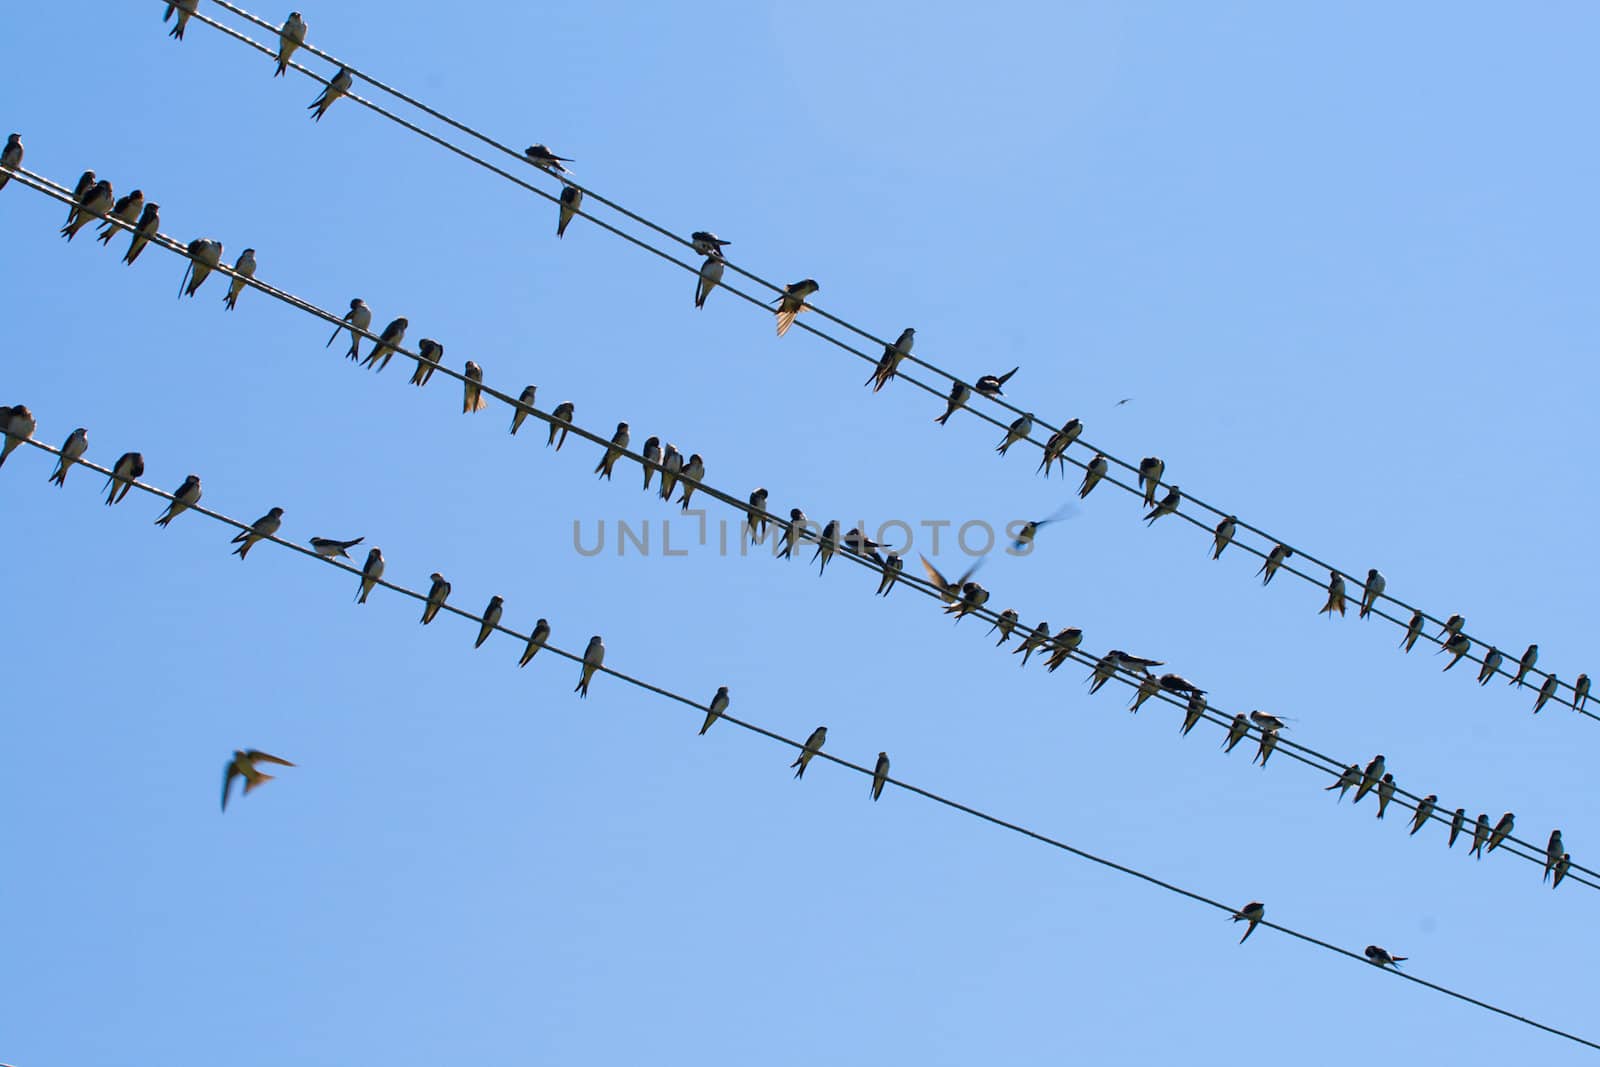 many swallows on wire, over blue sky background